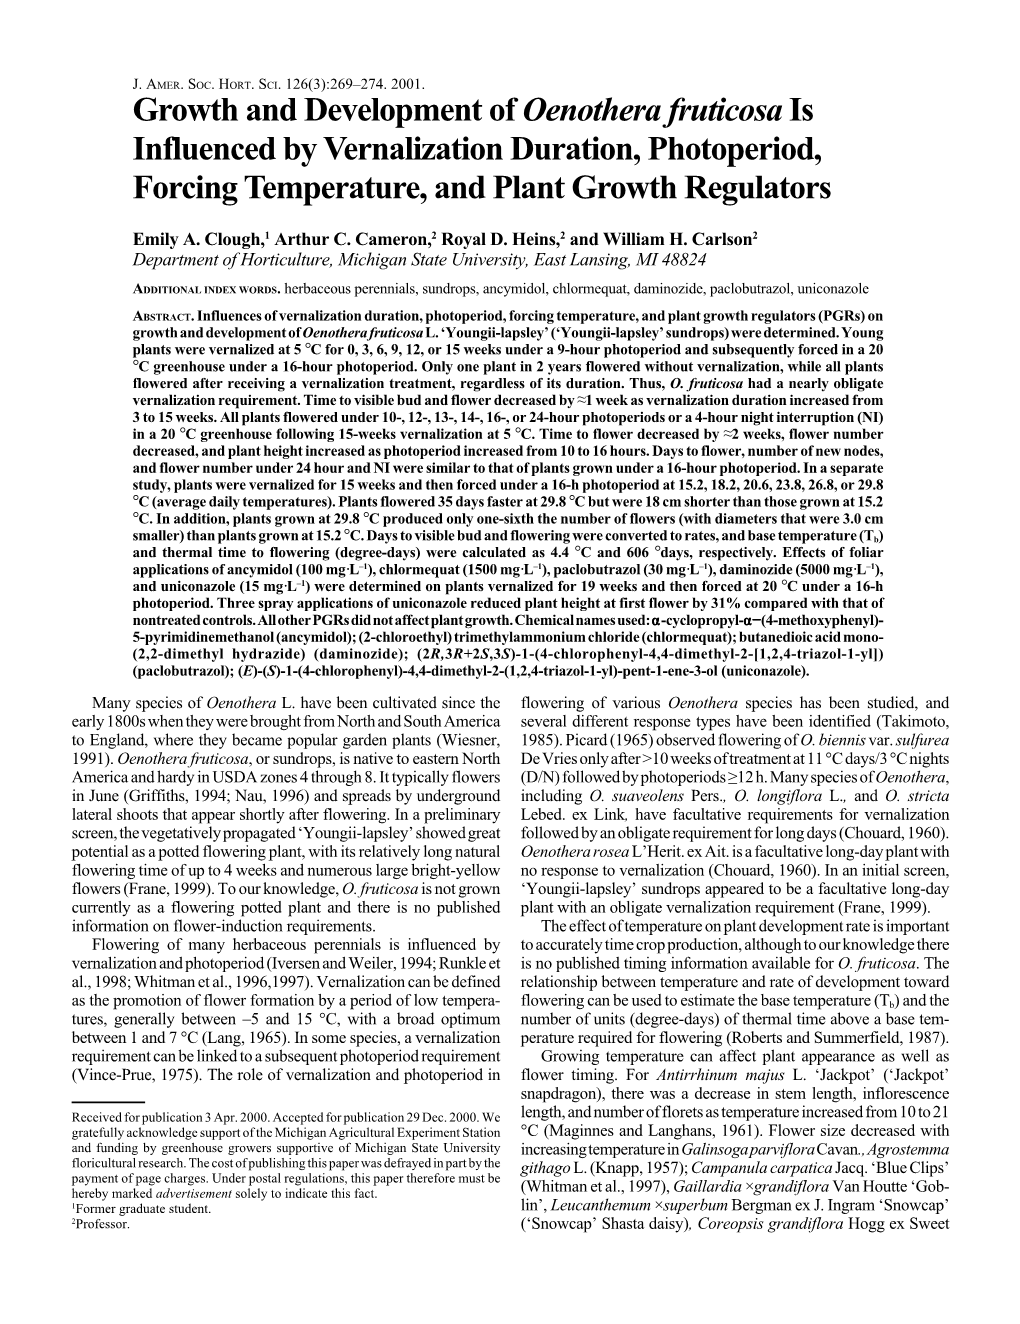 Growth and Development of Oenothera Fruticosa Is Influenced by Vernalization Duration, Photoperiod, Forcing Temperature, and Plant Growth Regulators